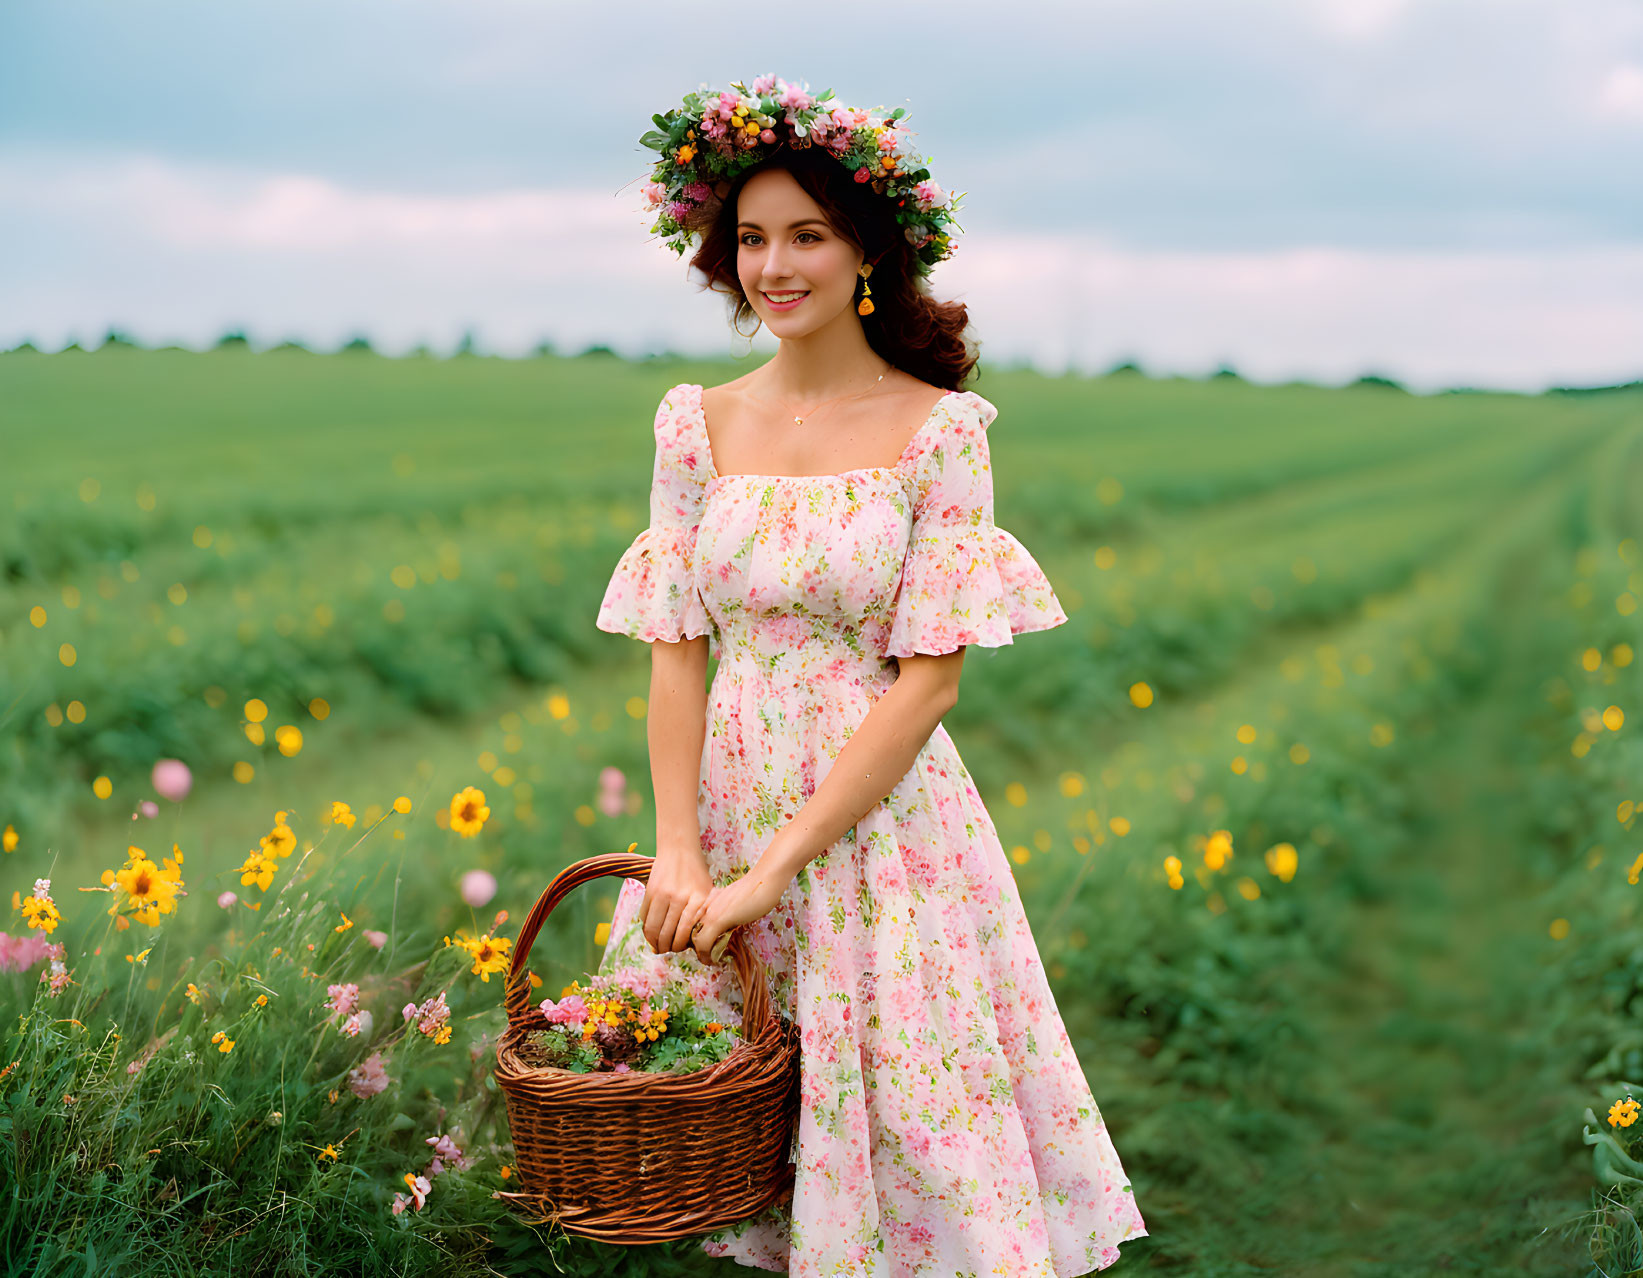 Girl in pretty dress with basket of flowers